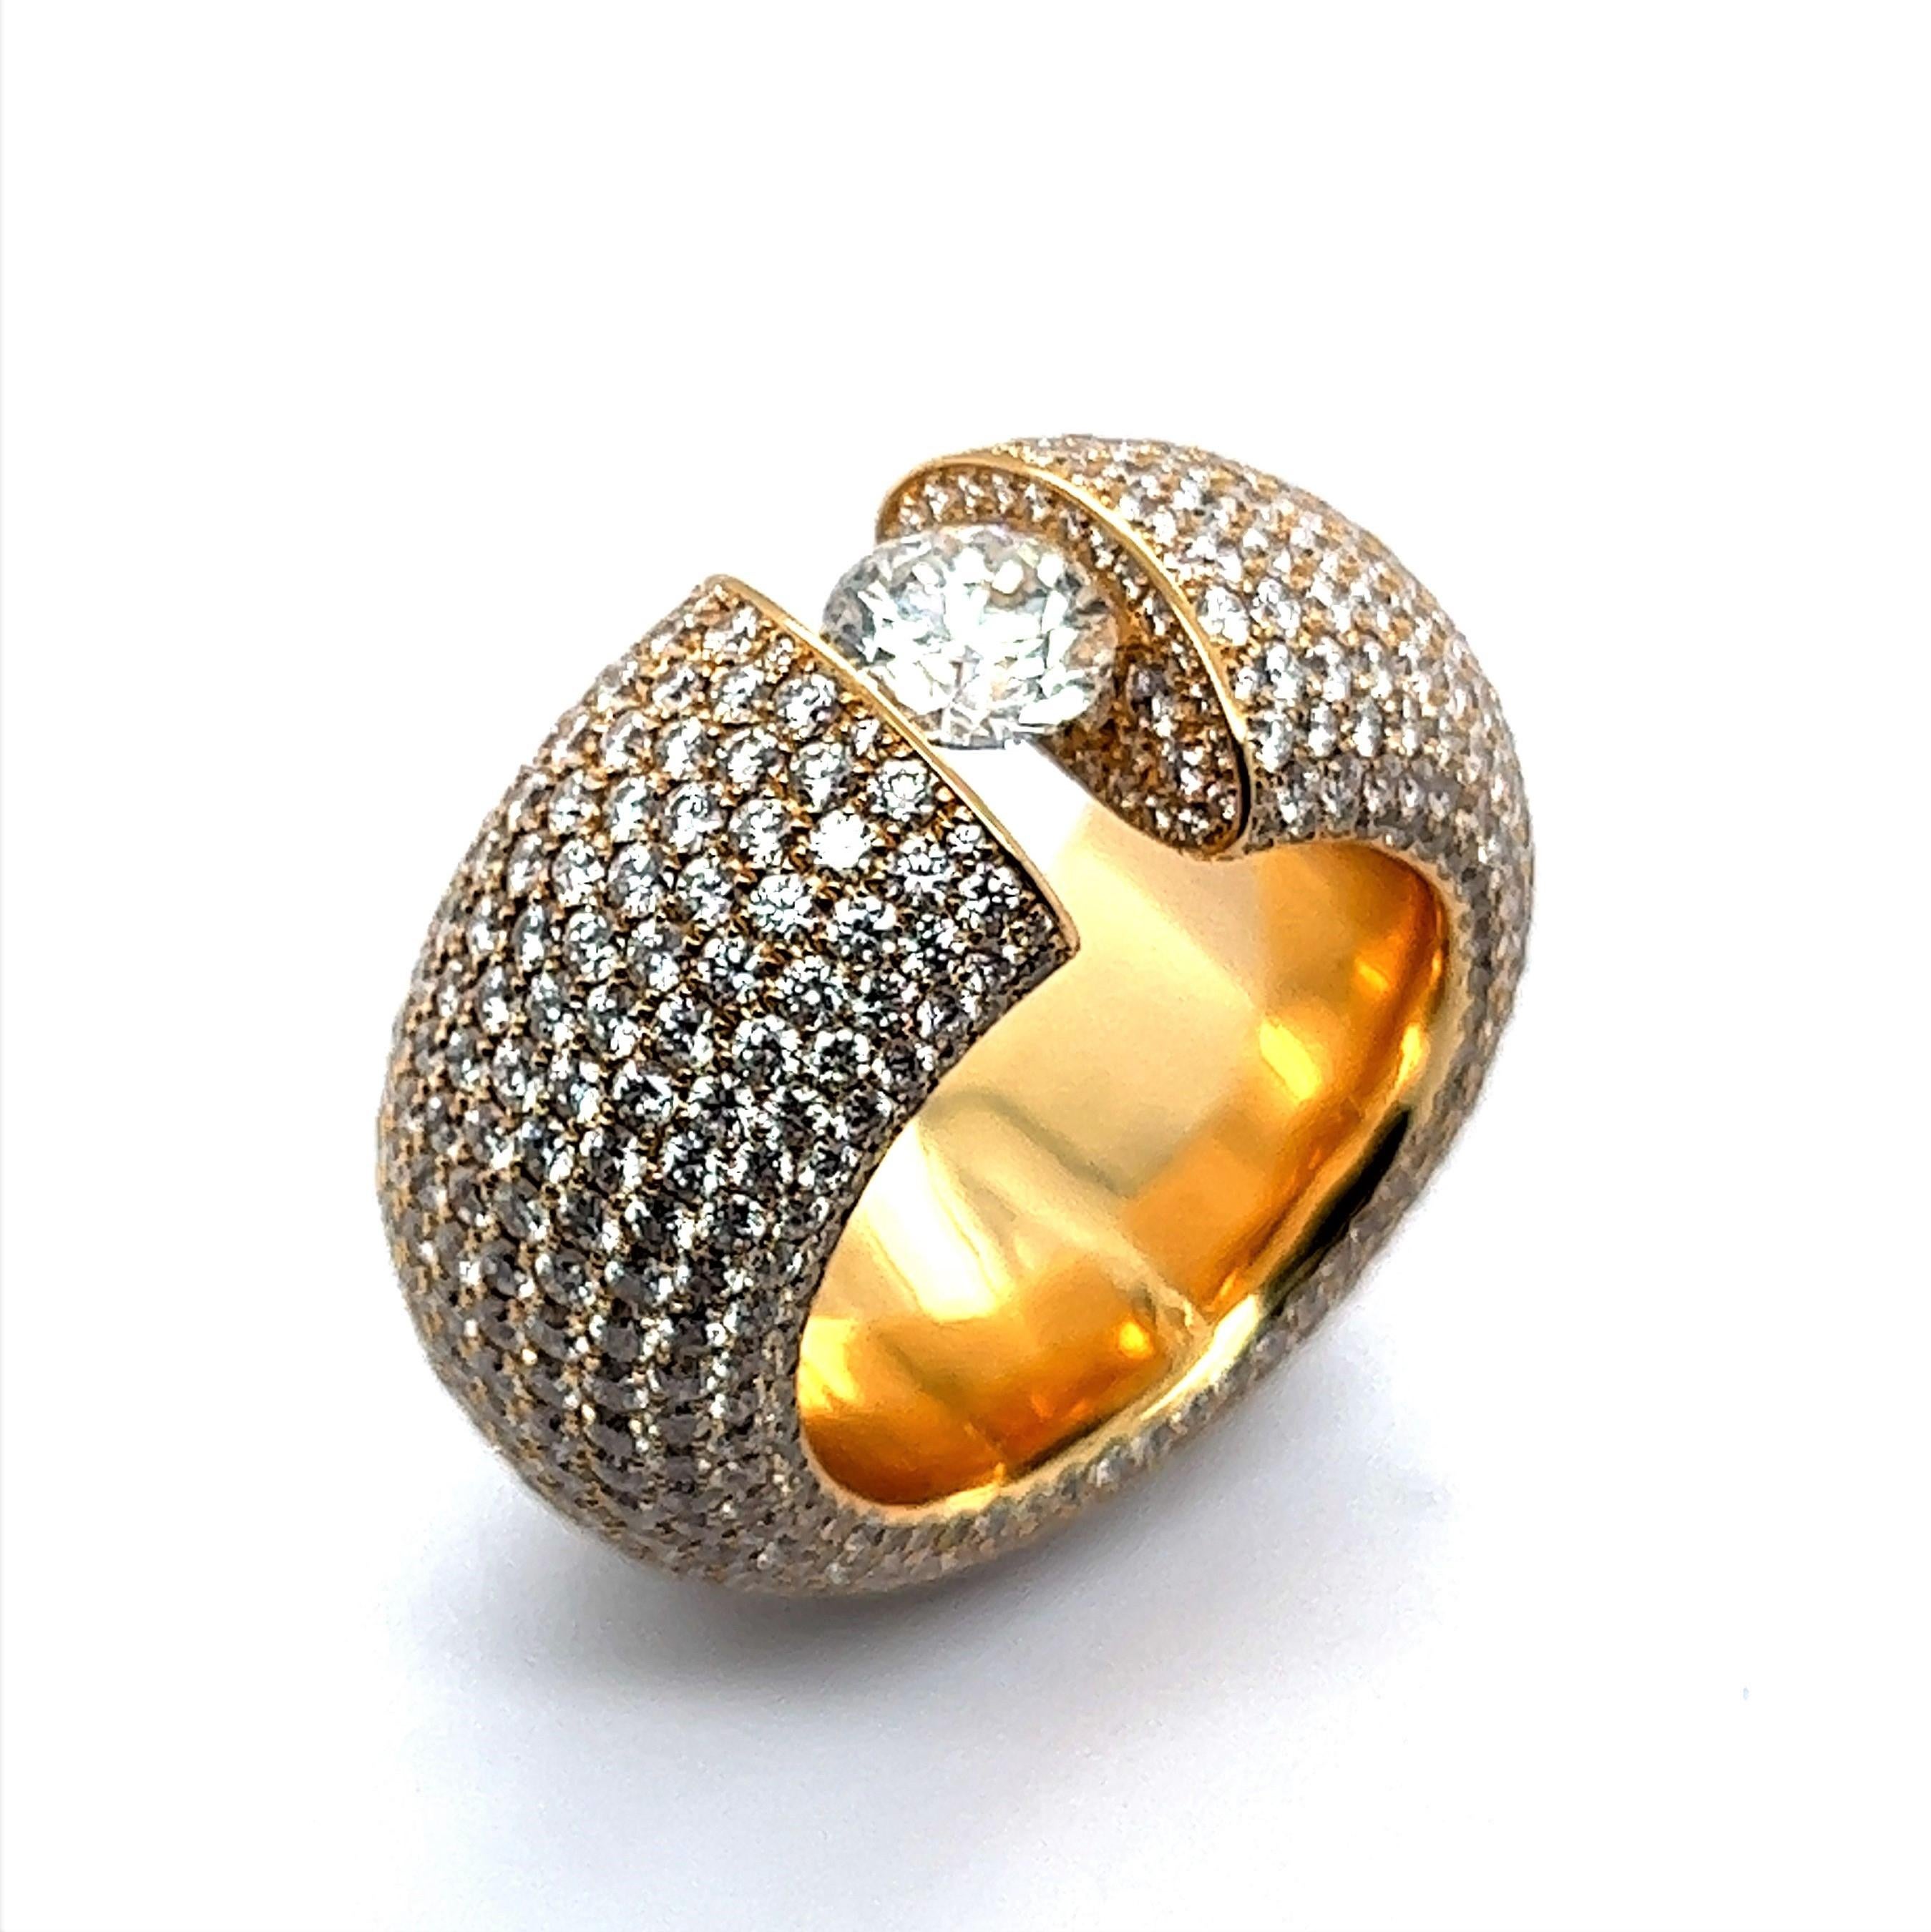 Brilliant Cut Glamorous Pave Diamond Ring in 18 Karat Yellow Gold For Sale